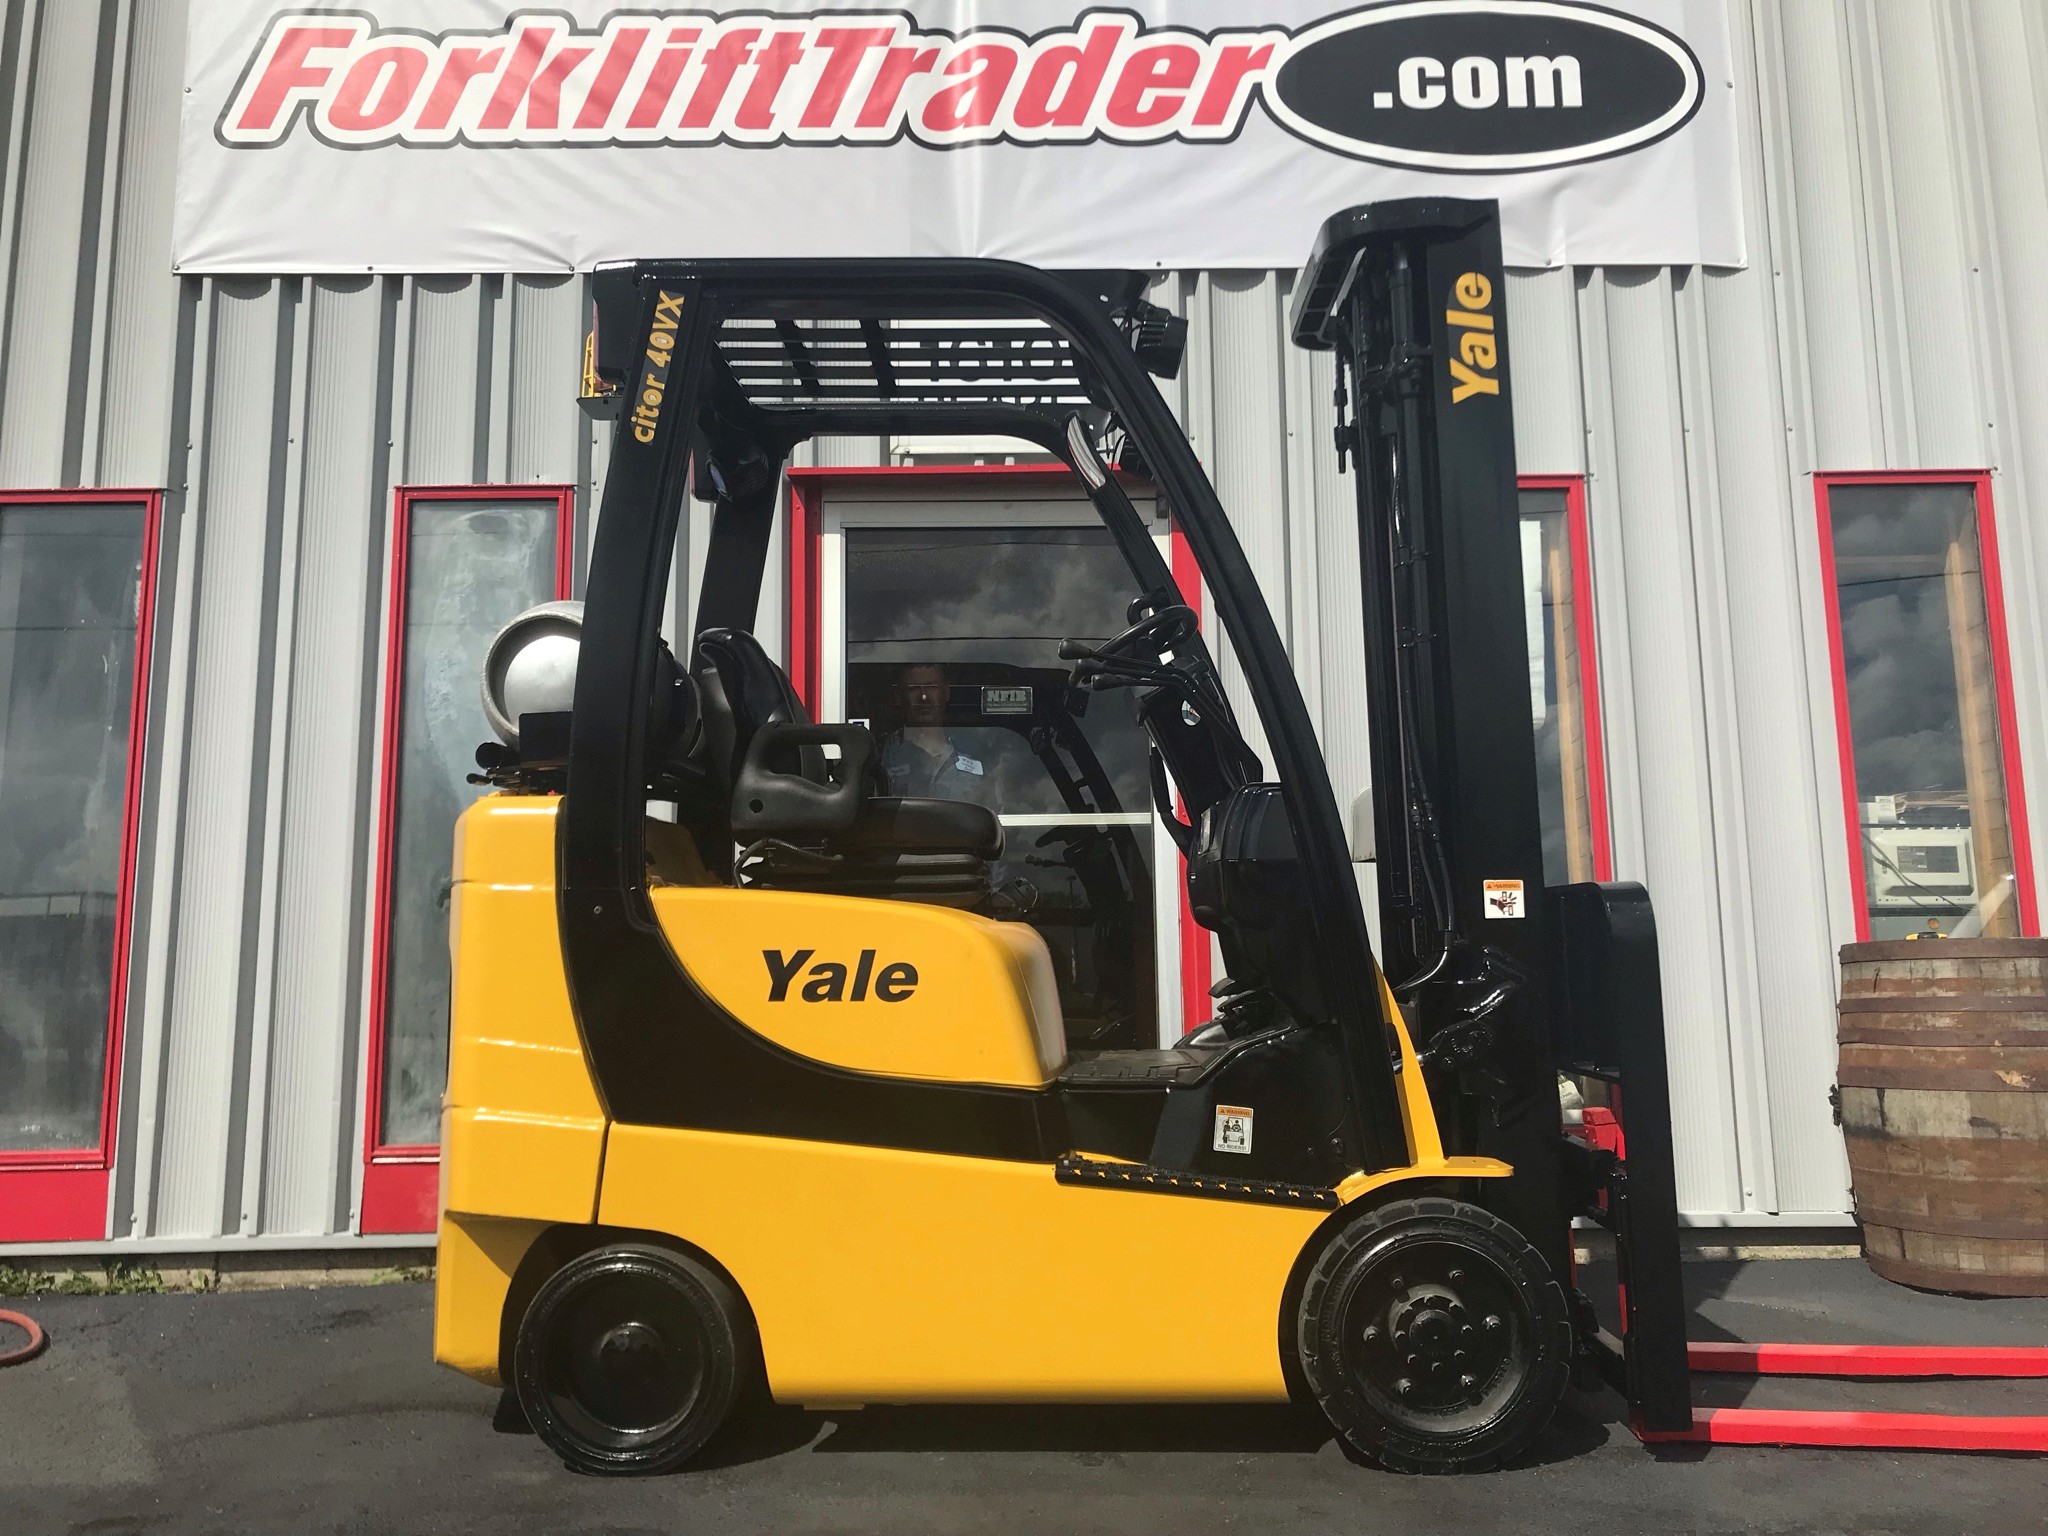 Cushion tires 2013 yale forklift for sale